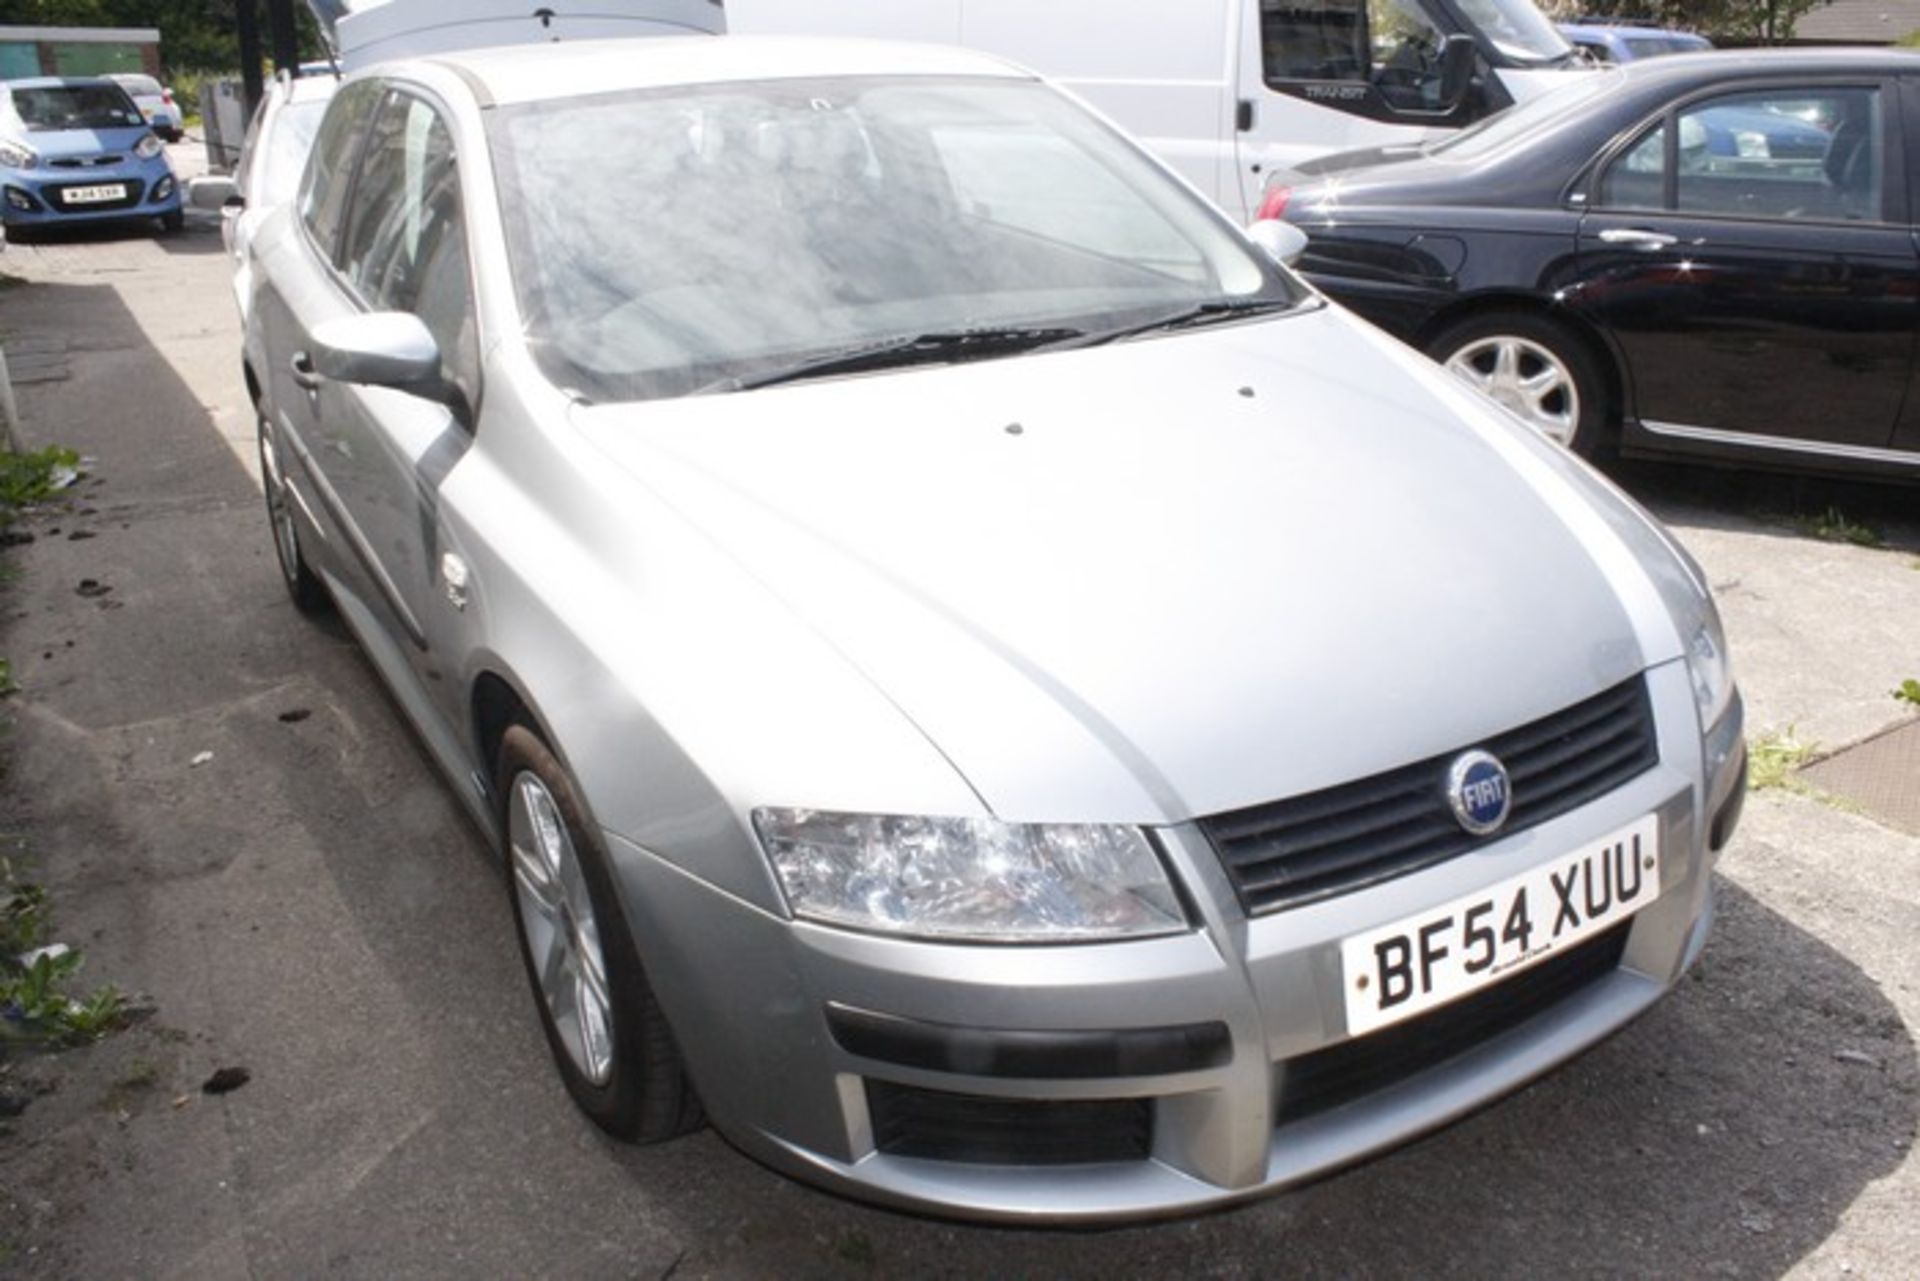 FIAT STILO ACTIVE SPORT, BF54 XUU, 67,320 MILES, ONE PREVIOUS OWNER, CENTRAL LOCKING, ELECTRIC - Image 2 of 4